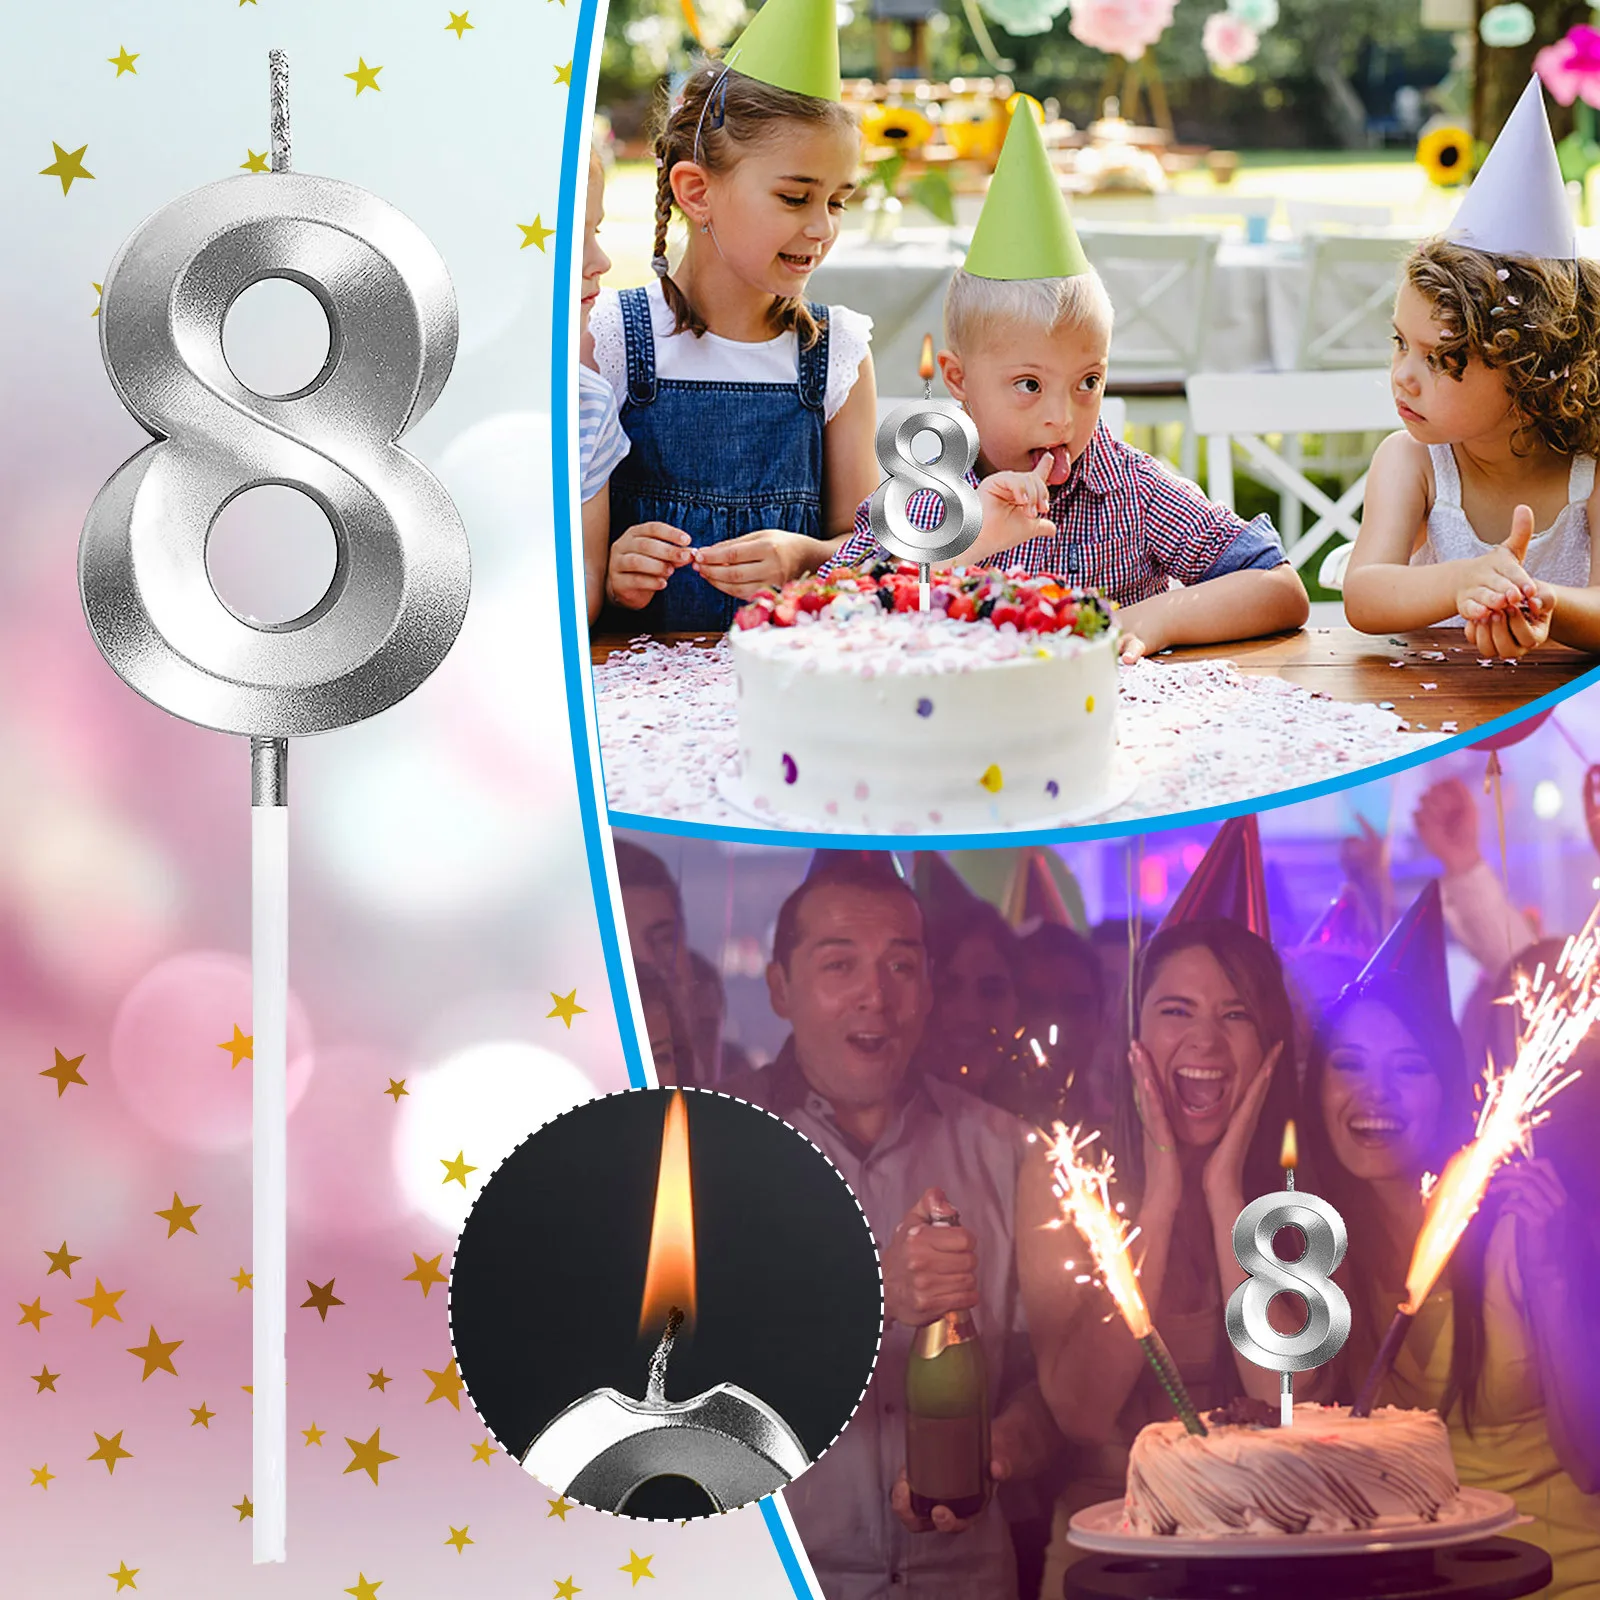 3 Nr Nana s Party Flashing Number Candle Holder & 4 Torta di Compleanno Candele {Unico} Age Decorazione 